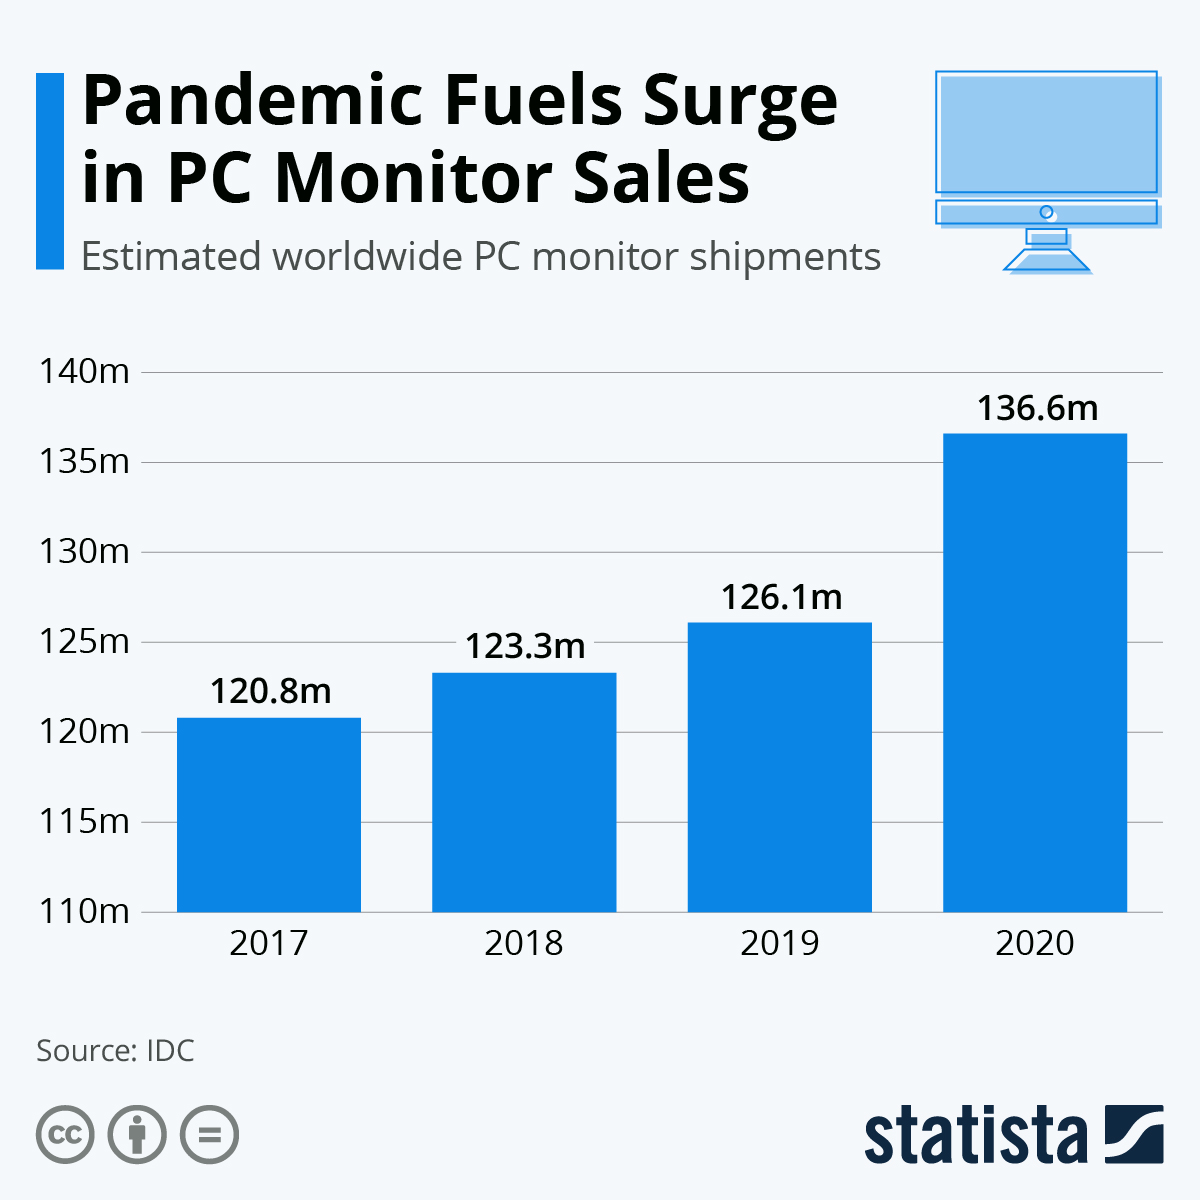 Pandemic Fuels Surge in PC Monitor Sales